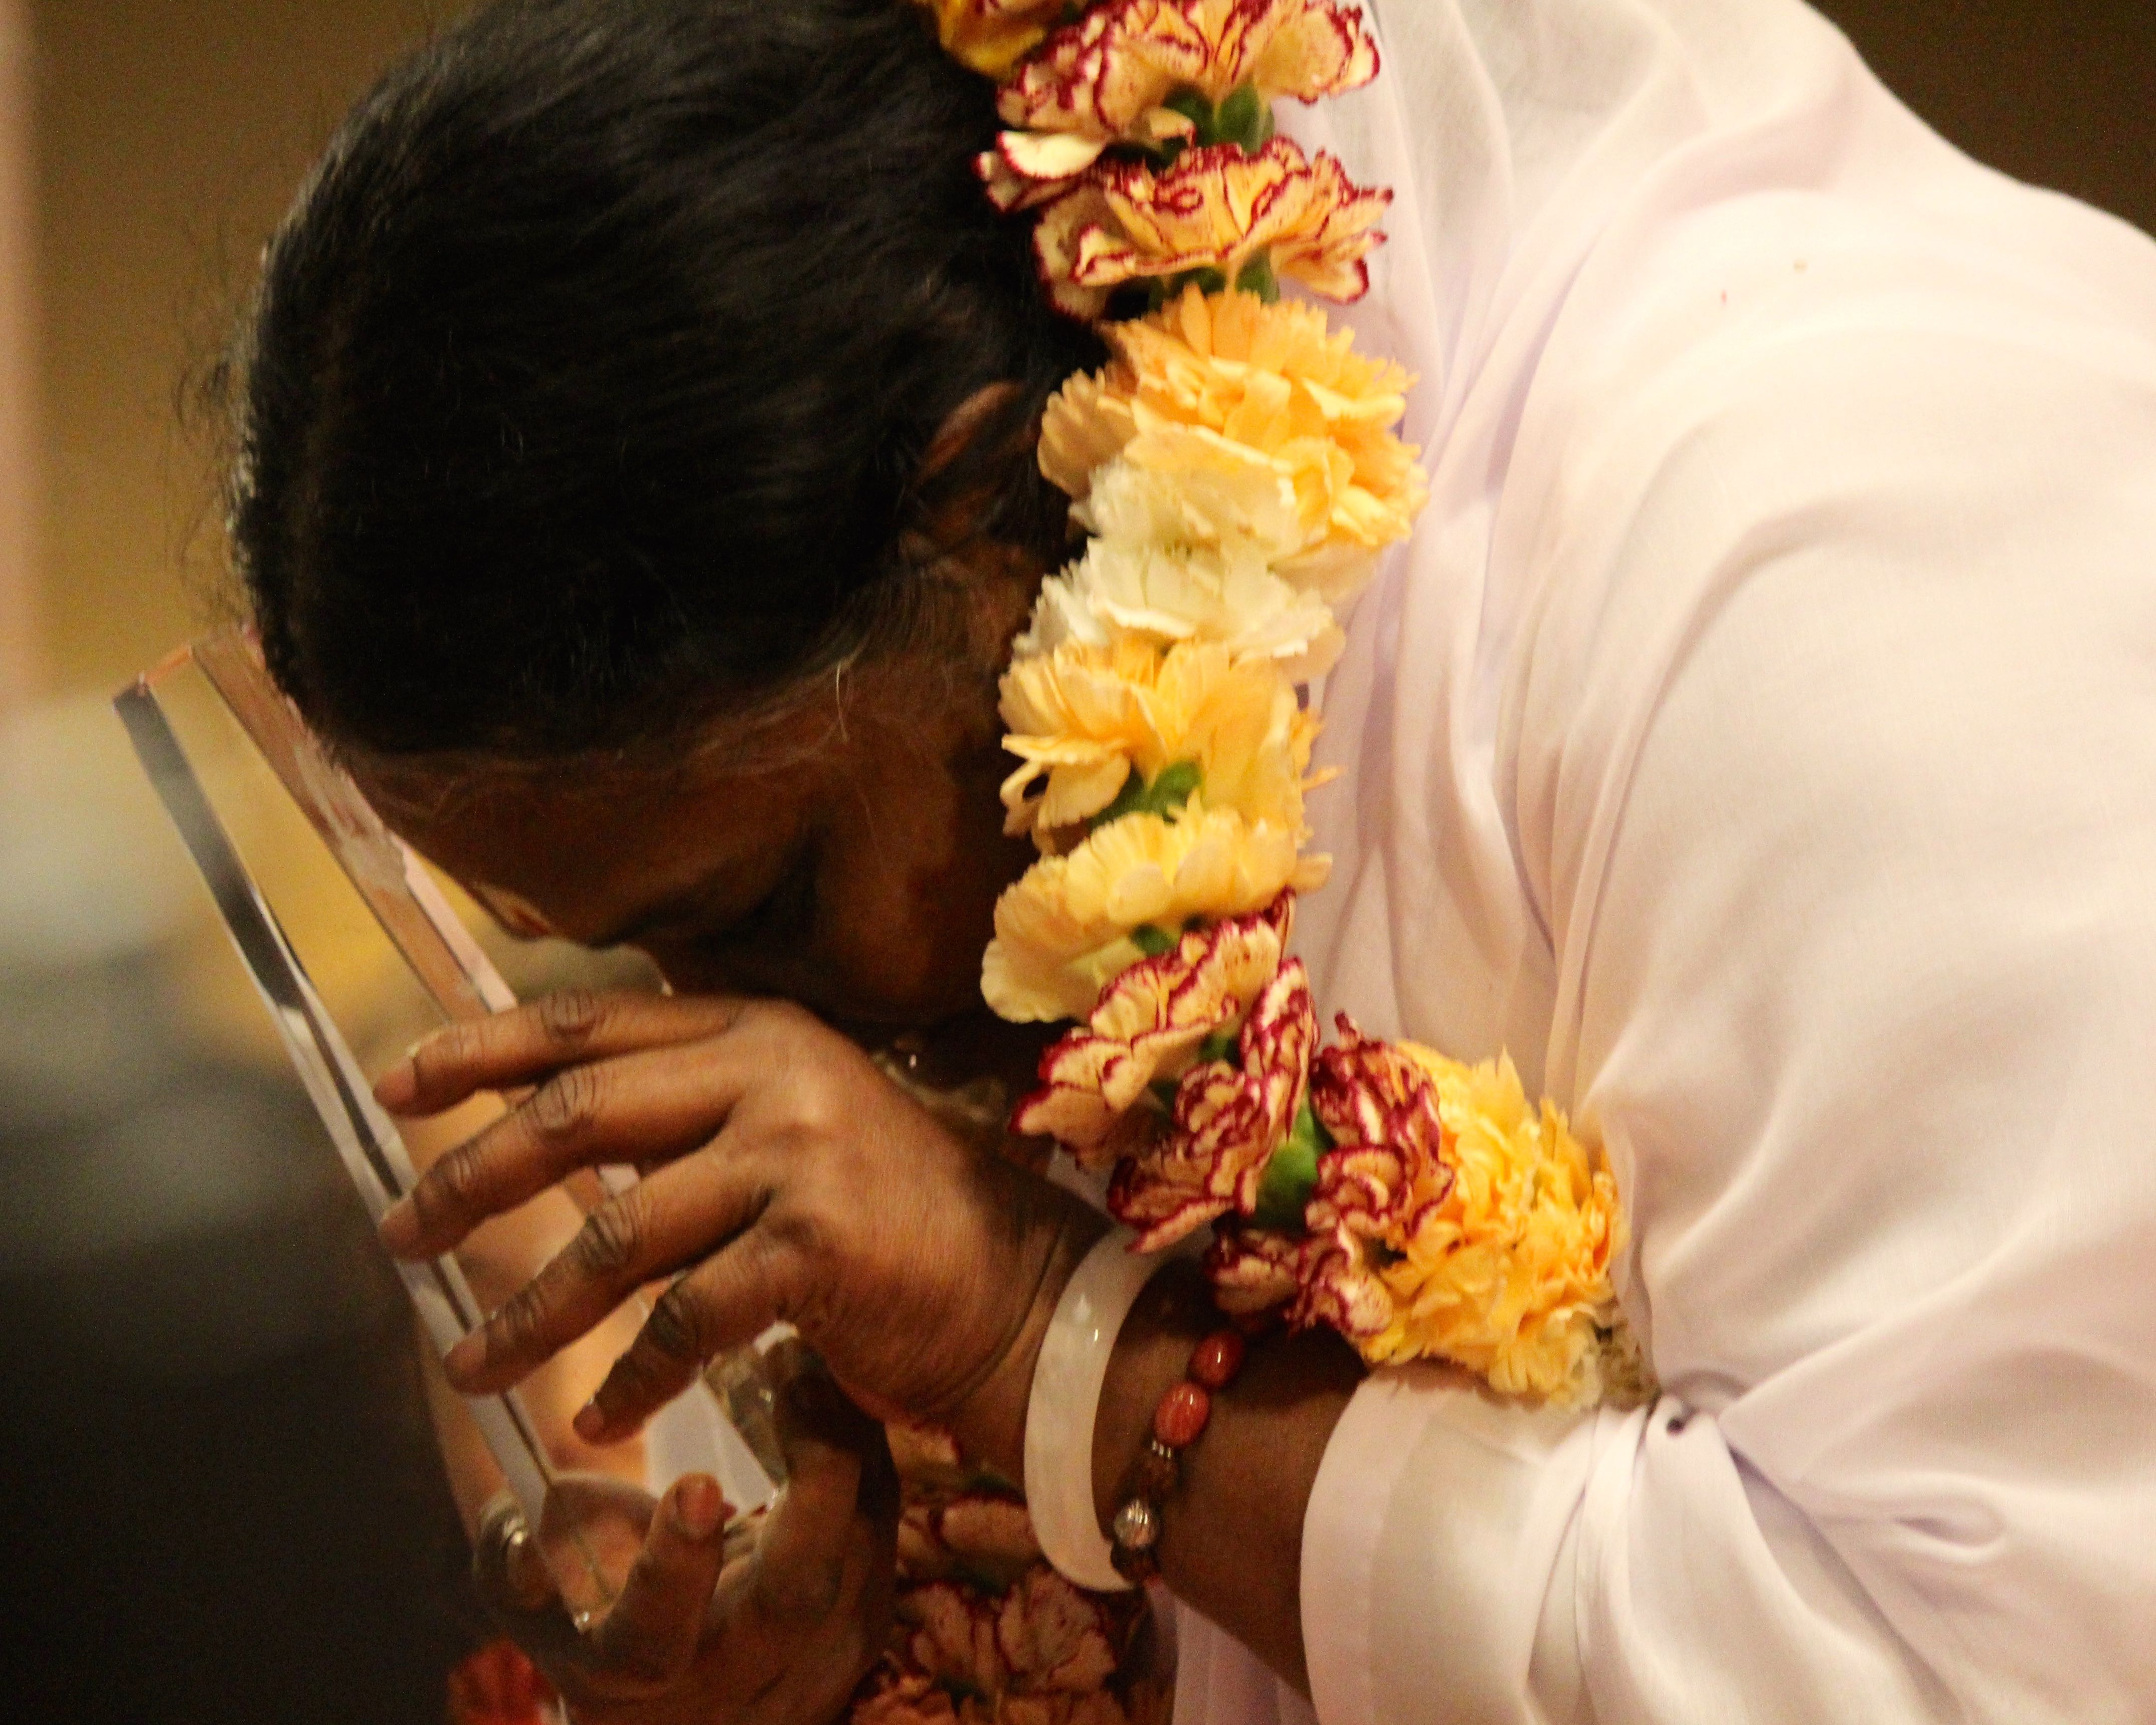 Amma "The Hugging Saint" accepts Golden Goody Award from Goody Awards in Los Angeles